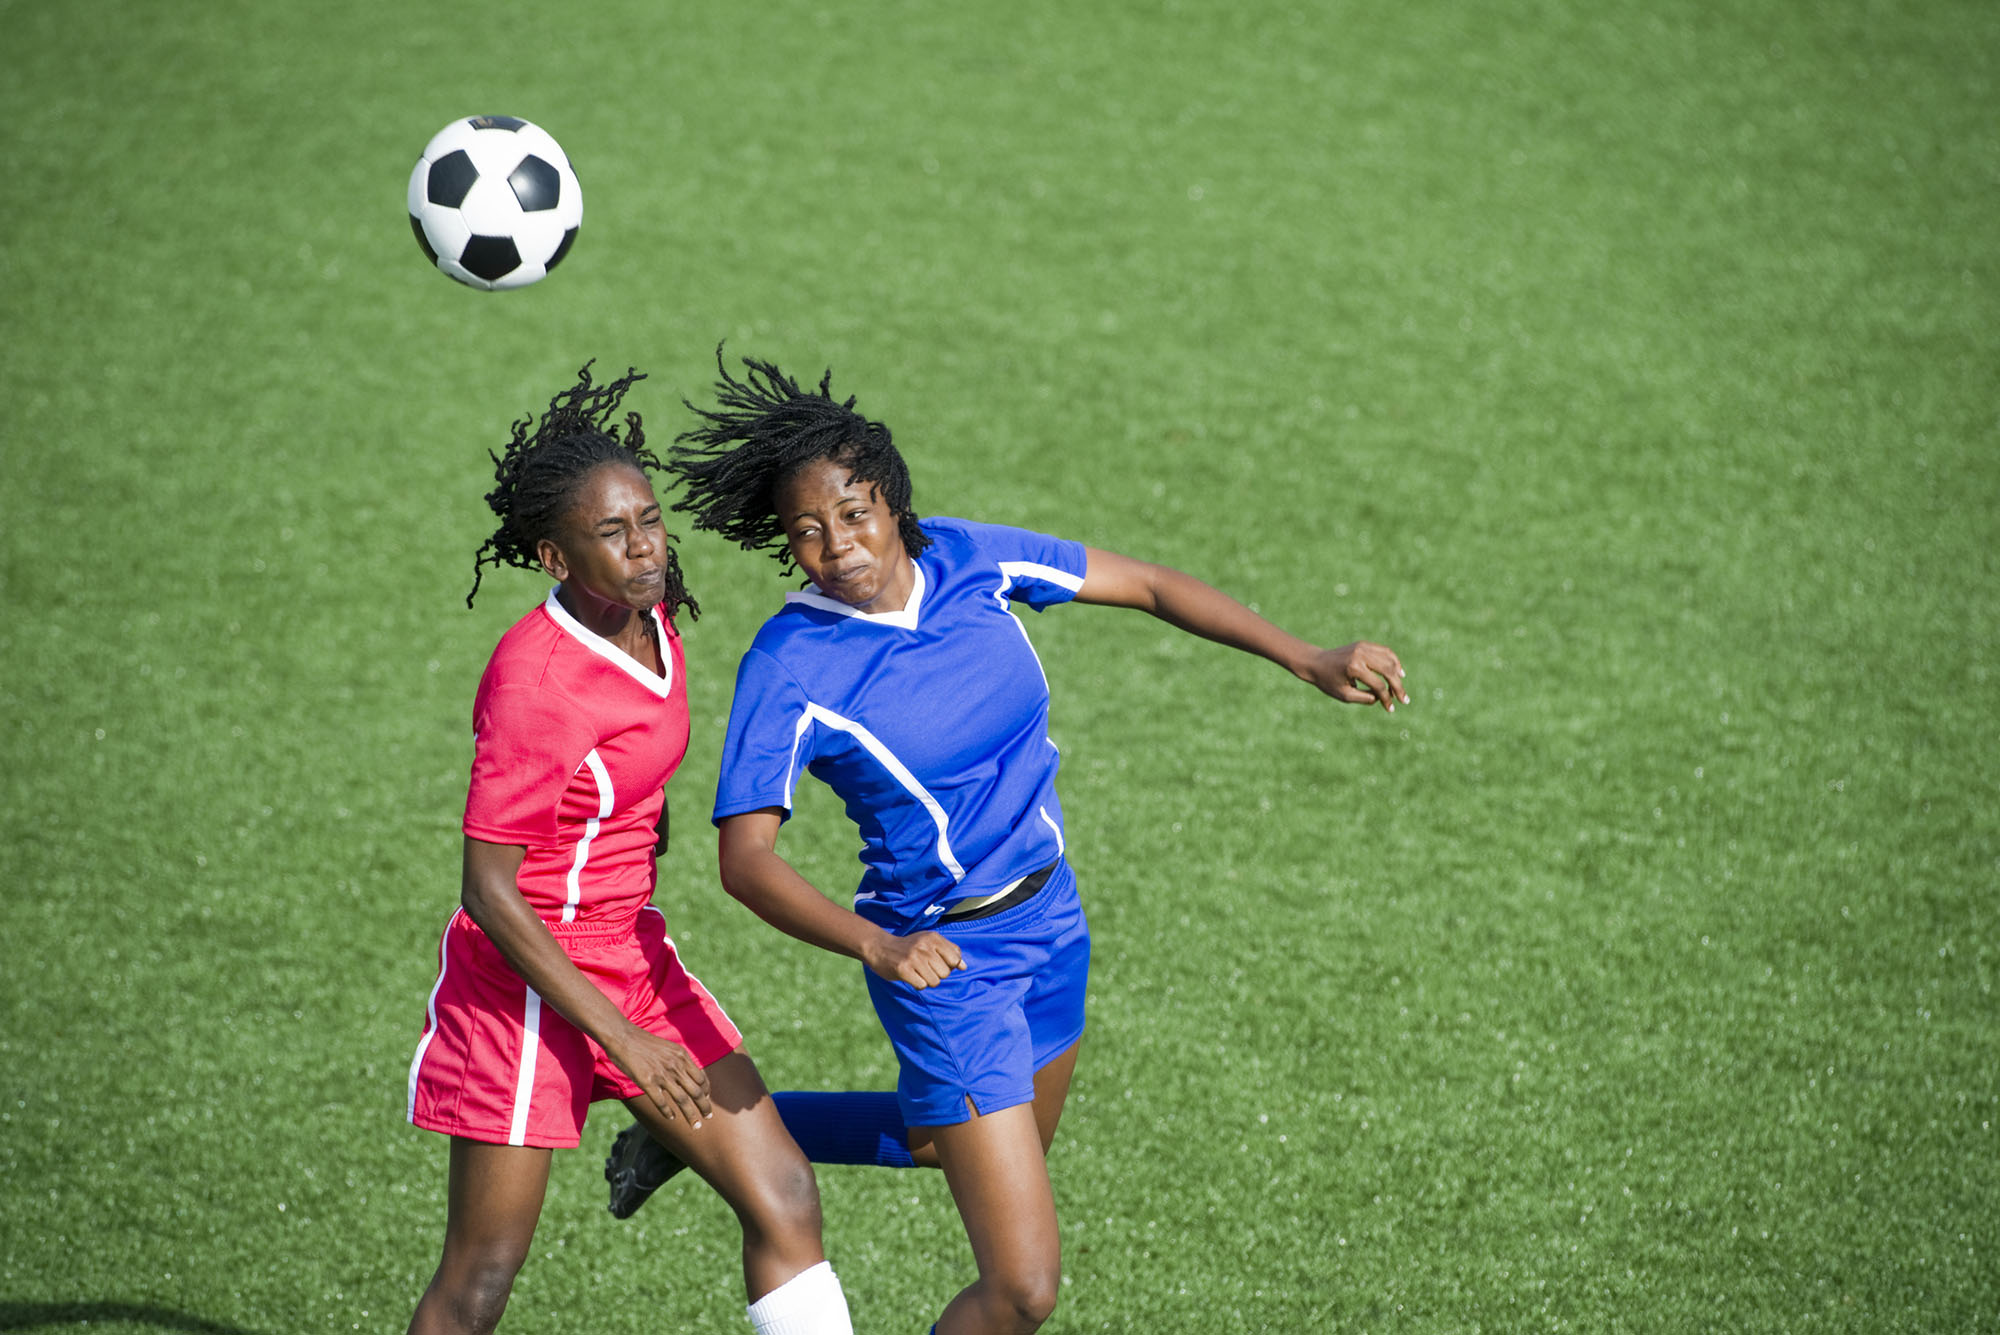 Two female soccer players competing for the ball, aerial view.